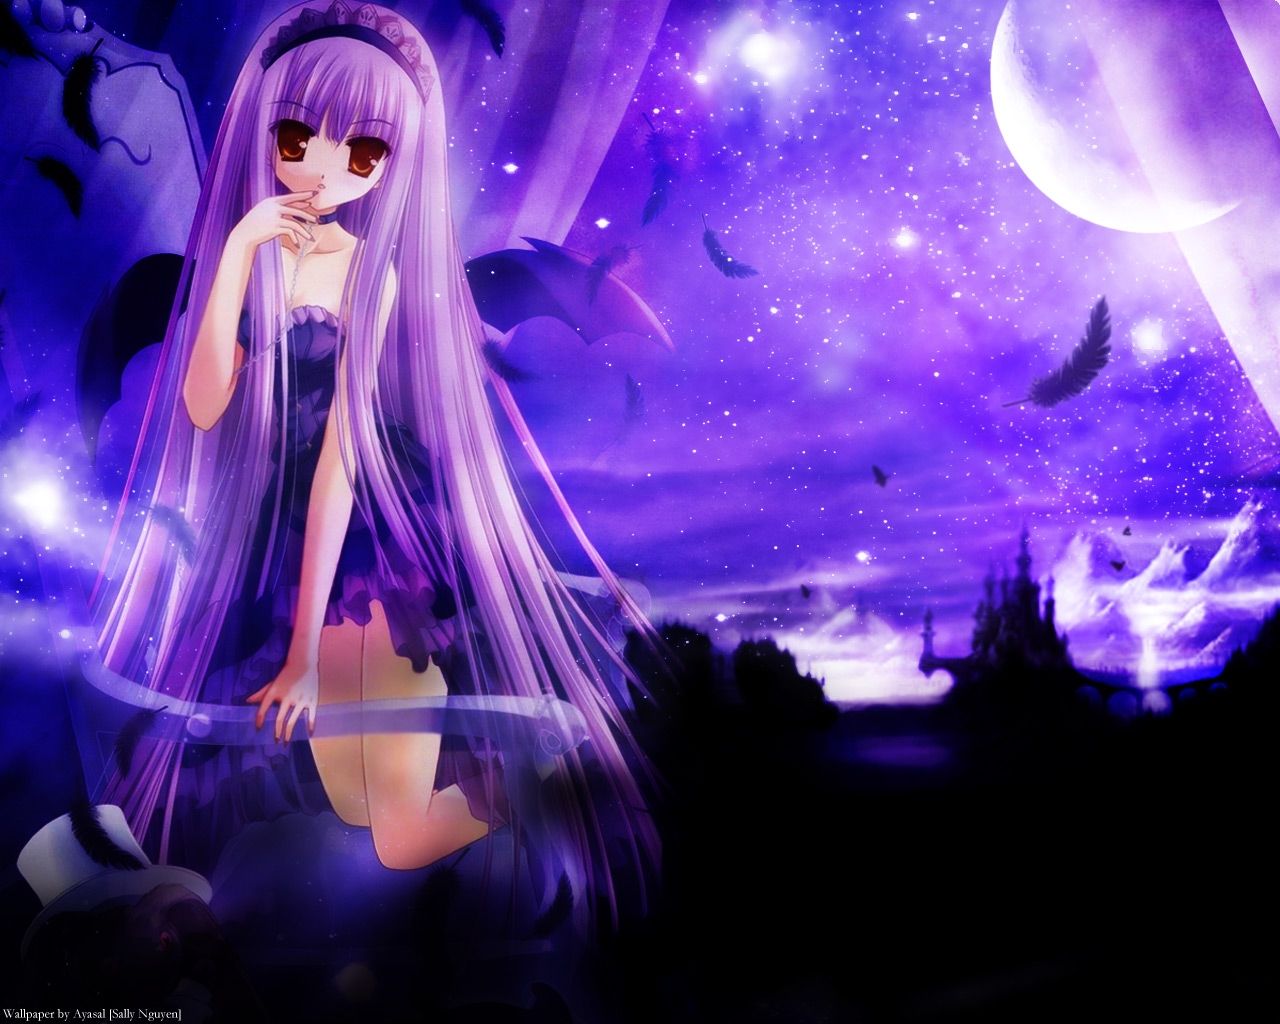 anime girl with purple hair on a seing